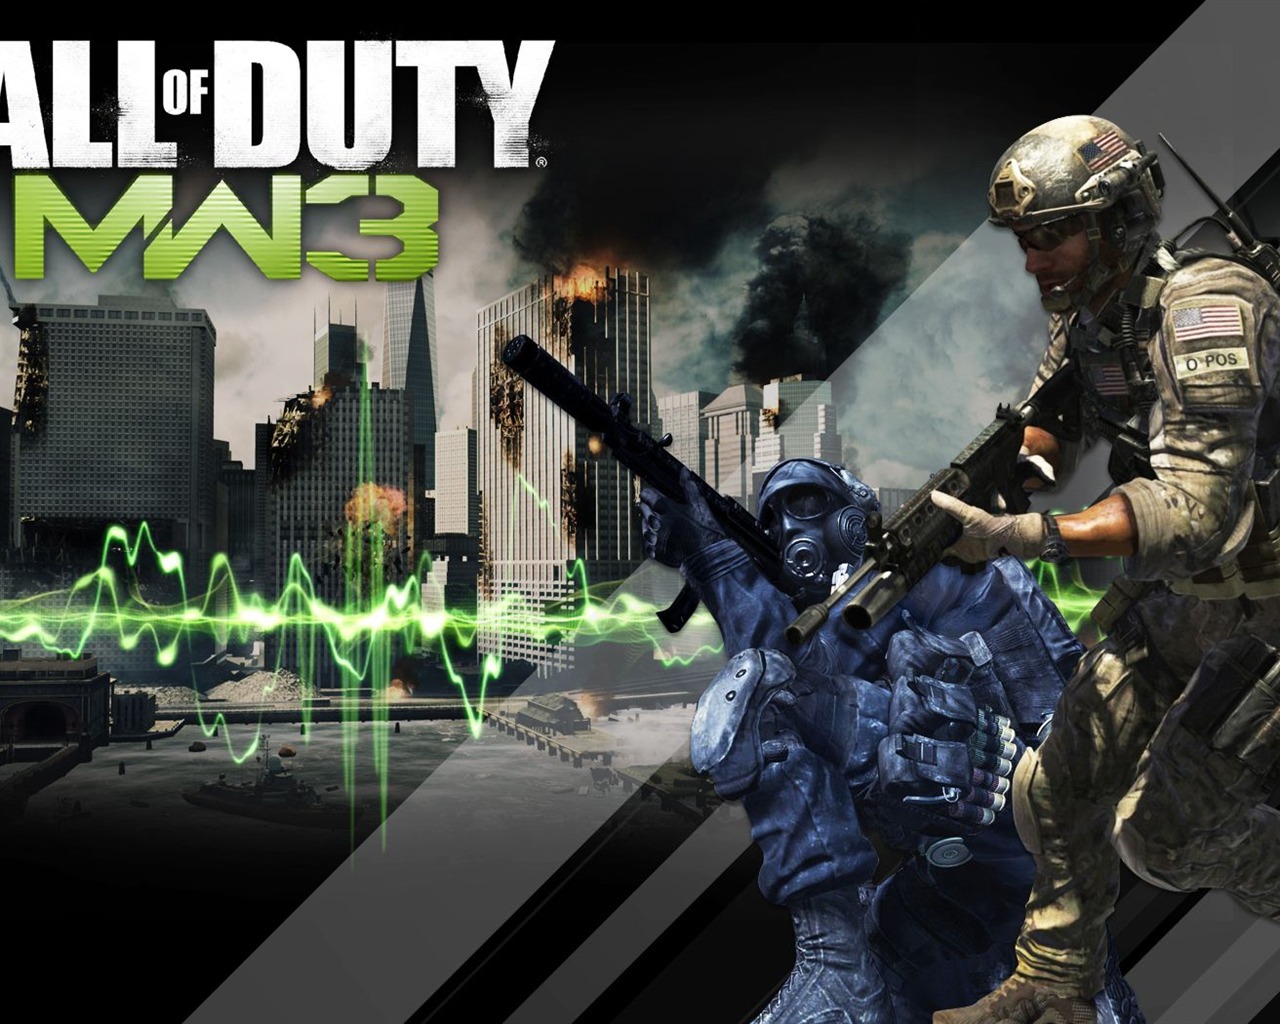 Call of Duty: MW3 HD Wallpapers #8 - 1280x1024